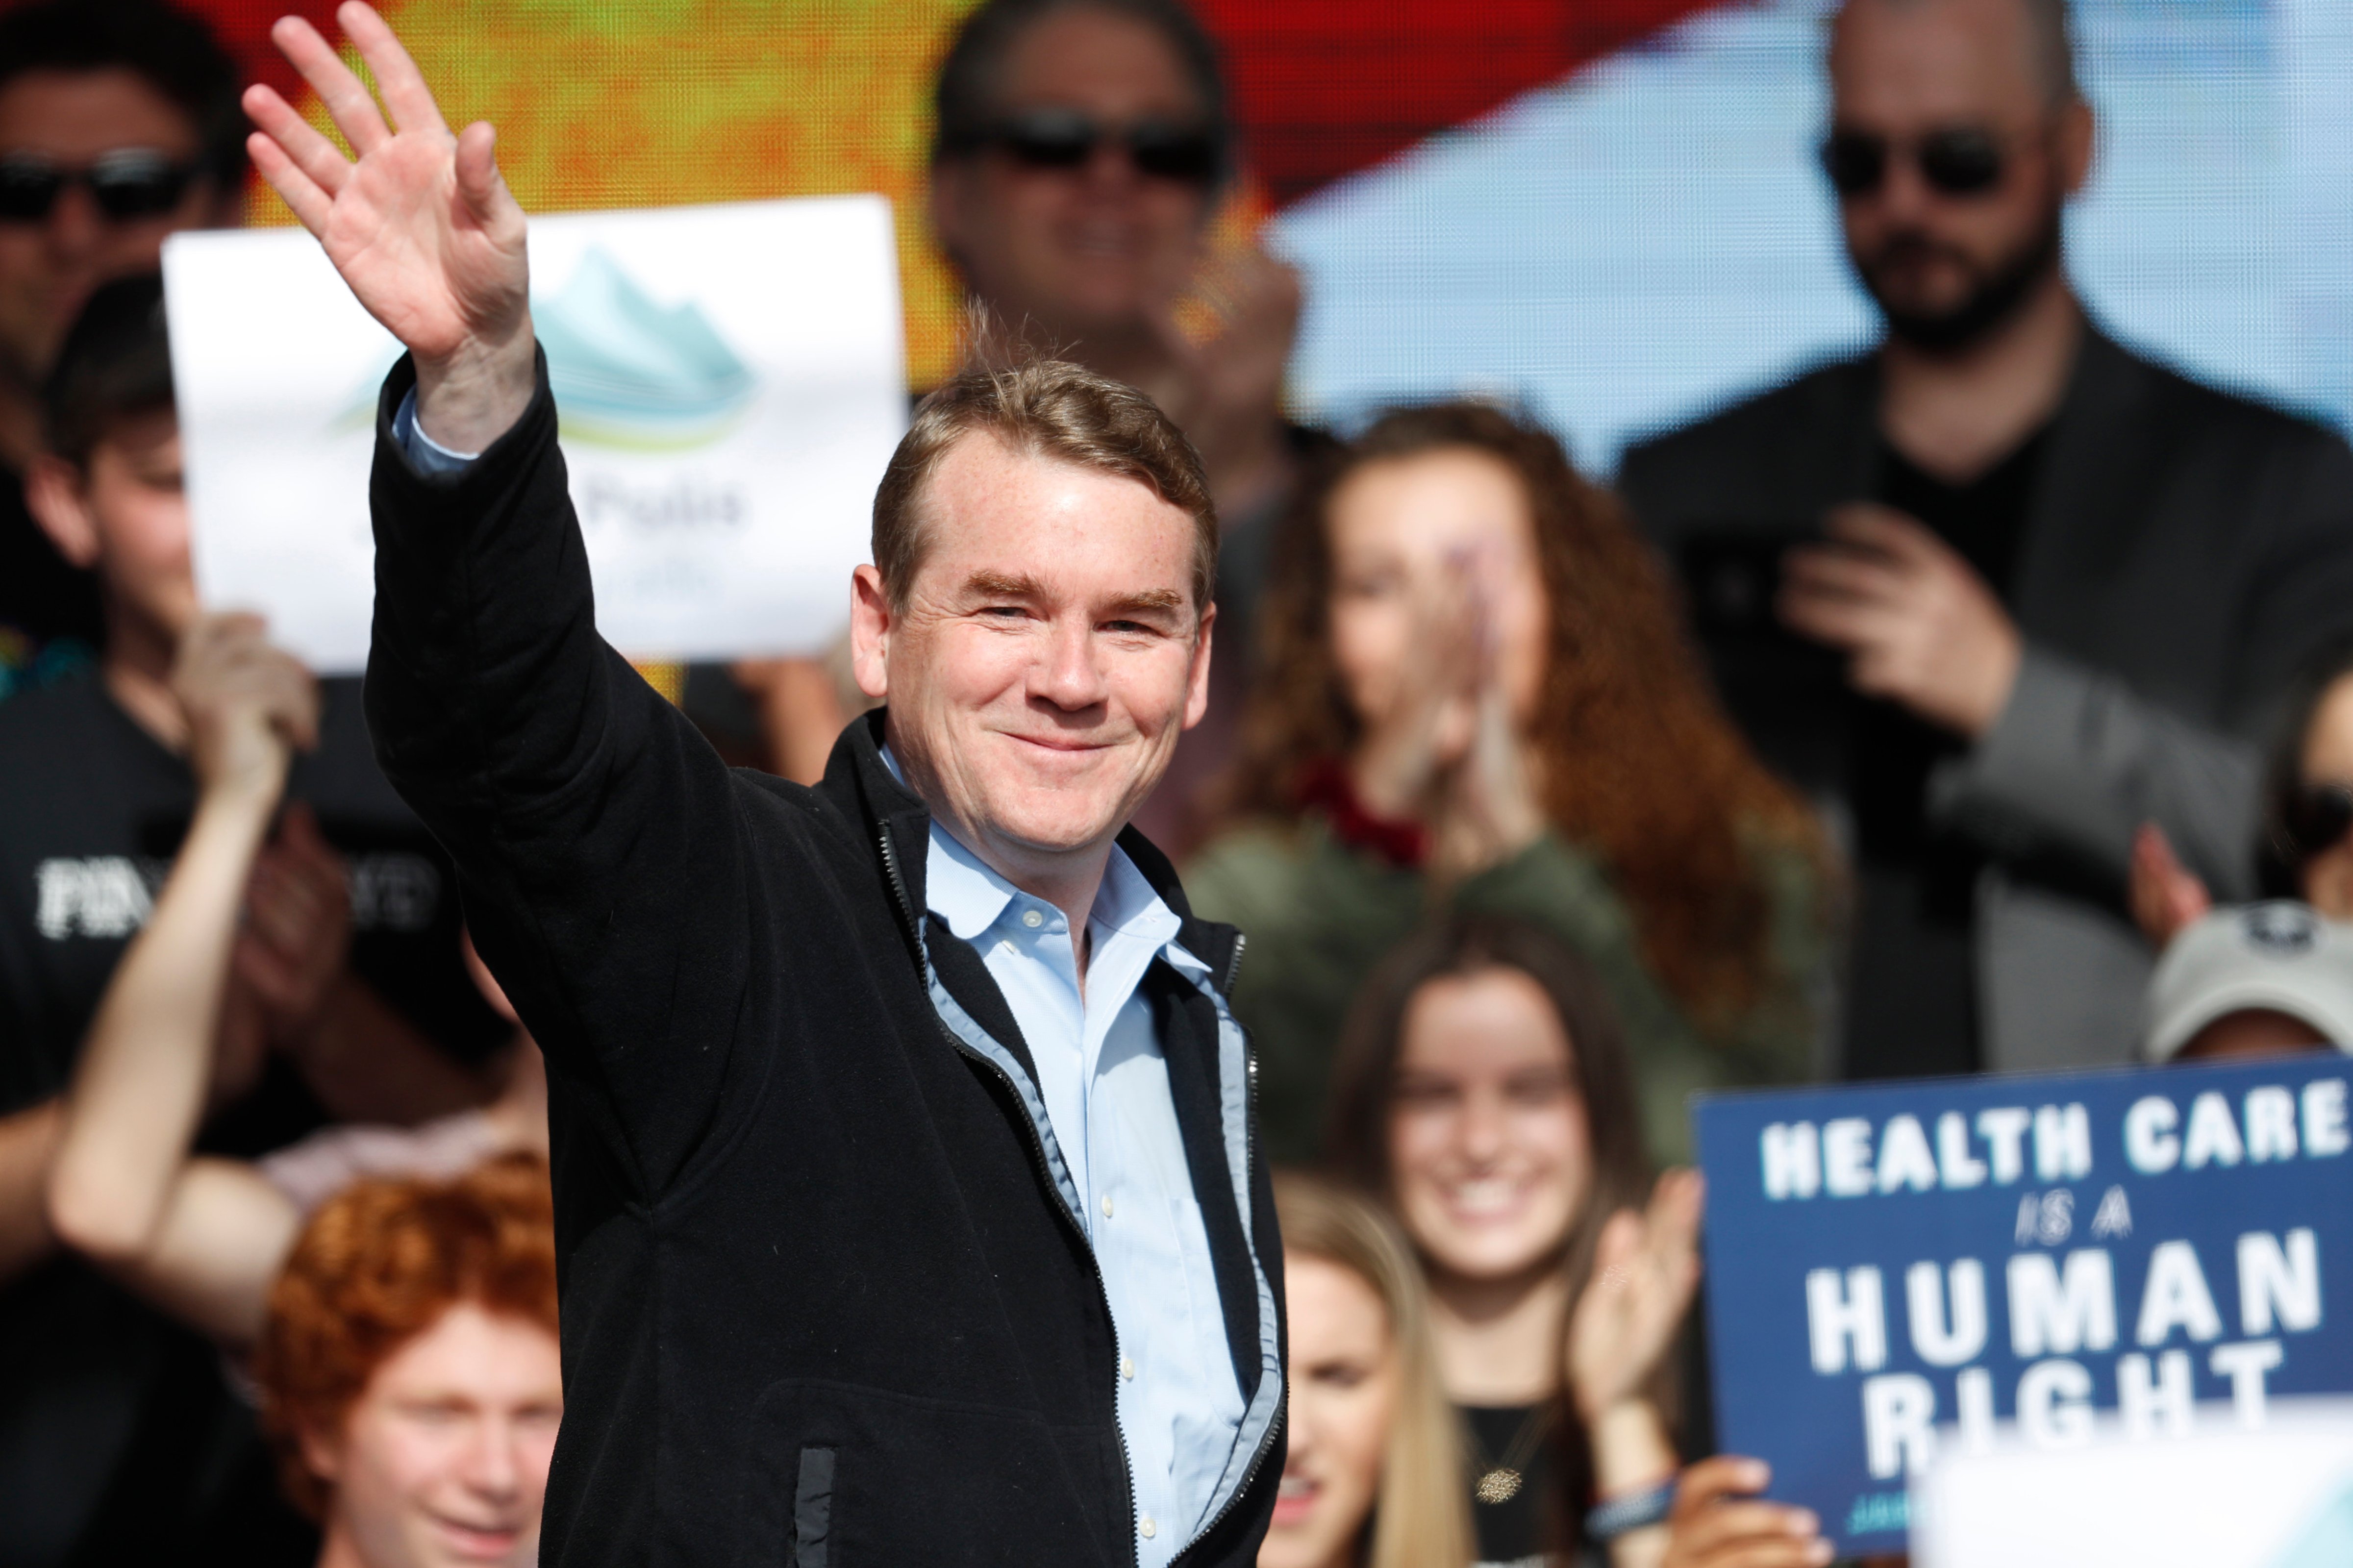 U.S. Senator Michael Bennet greets voters during a rally with young voters on the campus of the University of Colorado in Boulder, Colo. on Oct. 24, 2018. (David Zalubowski—AP U.S. Senator Michael Bennet greets voters during a rally with young voters on the campus of the University of Colorado in Boulder, Colo. on Oct. 24, 2018.)